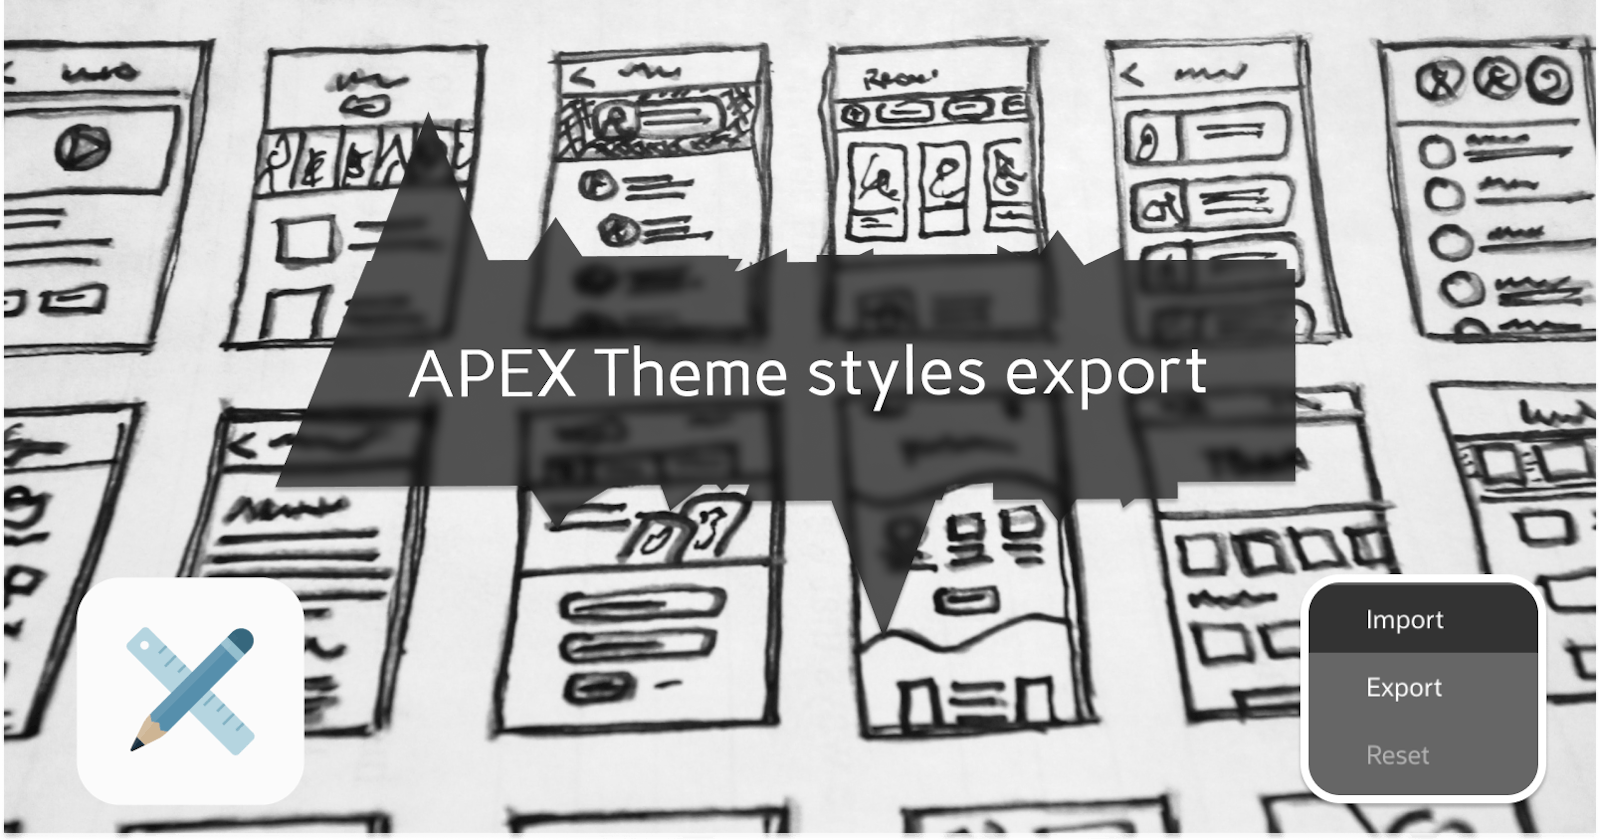 How to copy APEX theme styles between applications